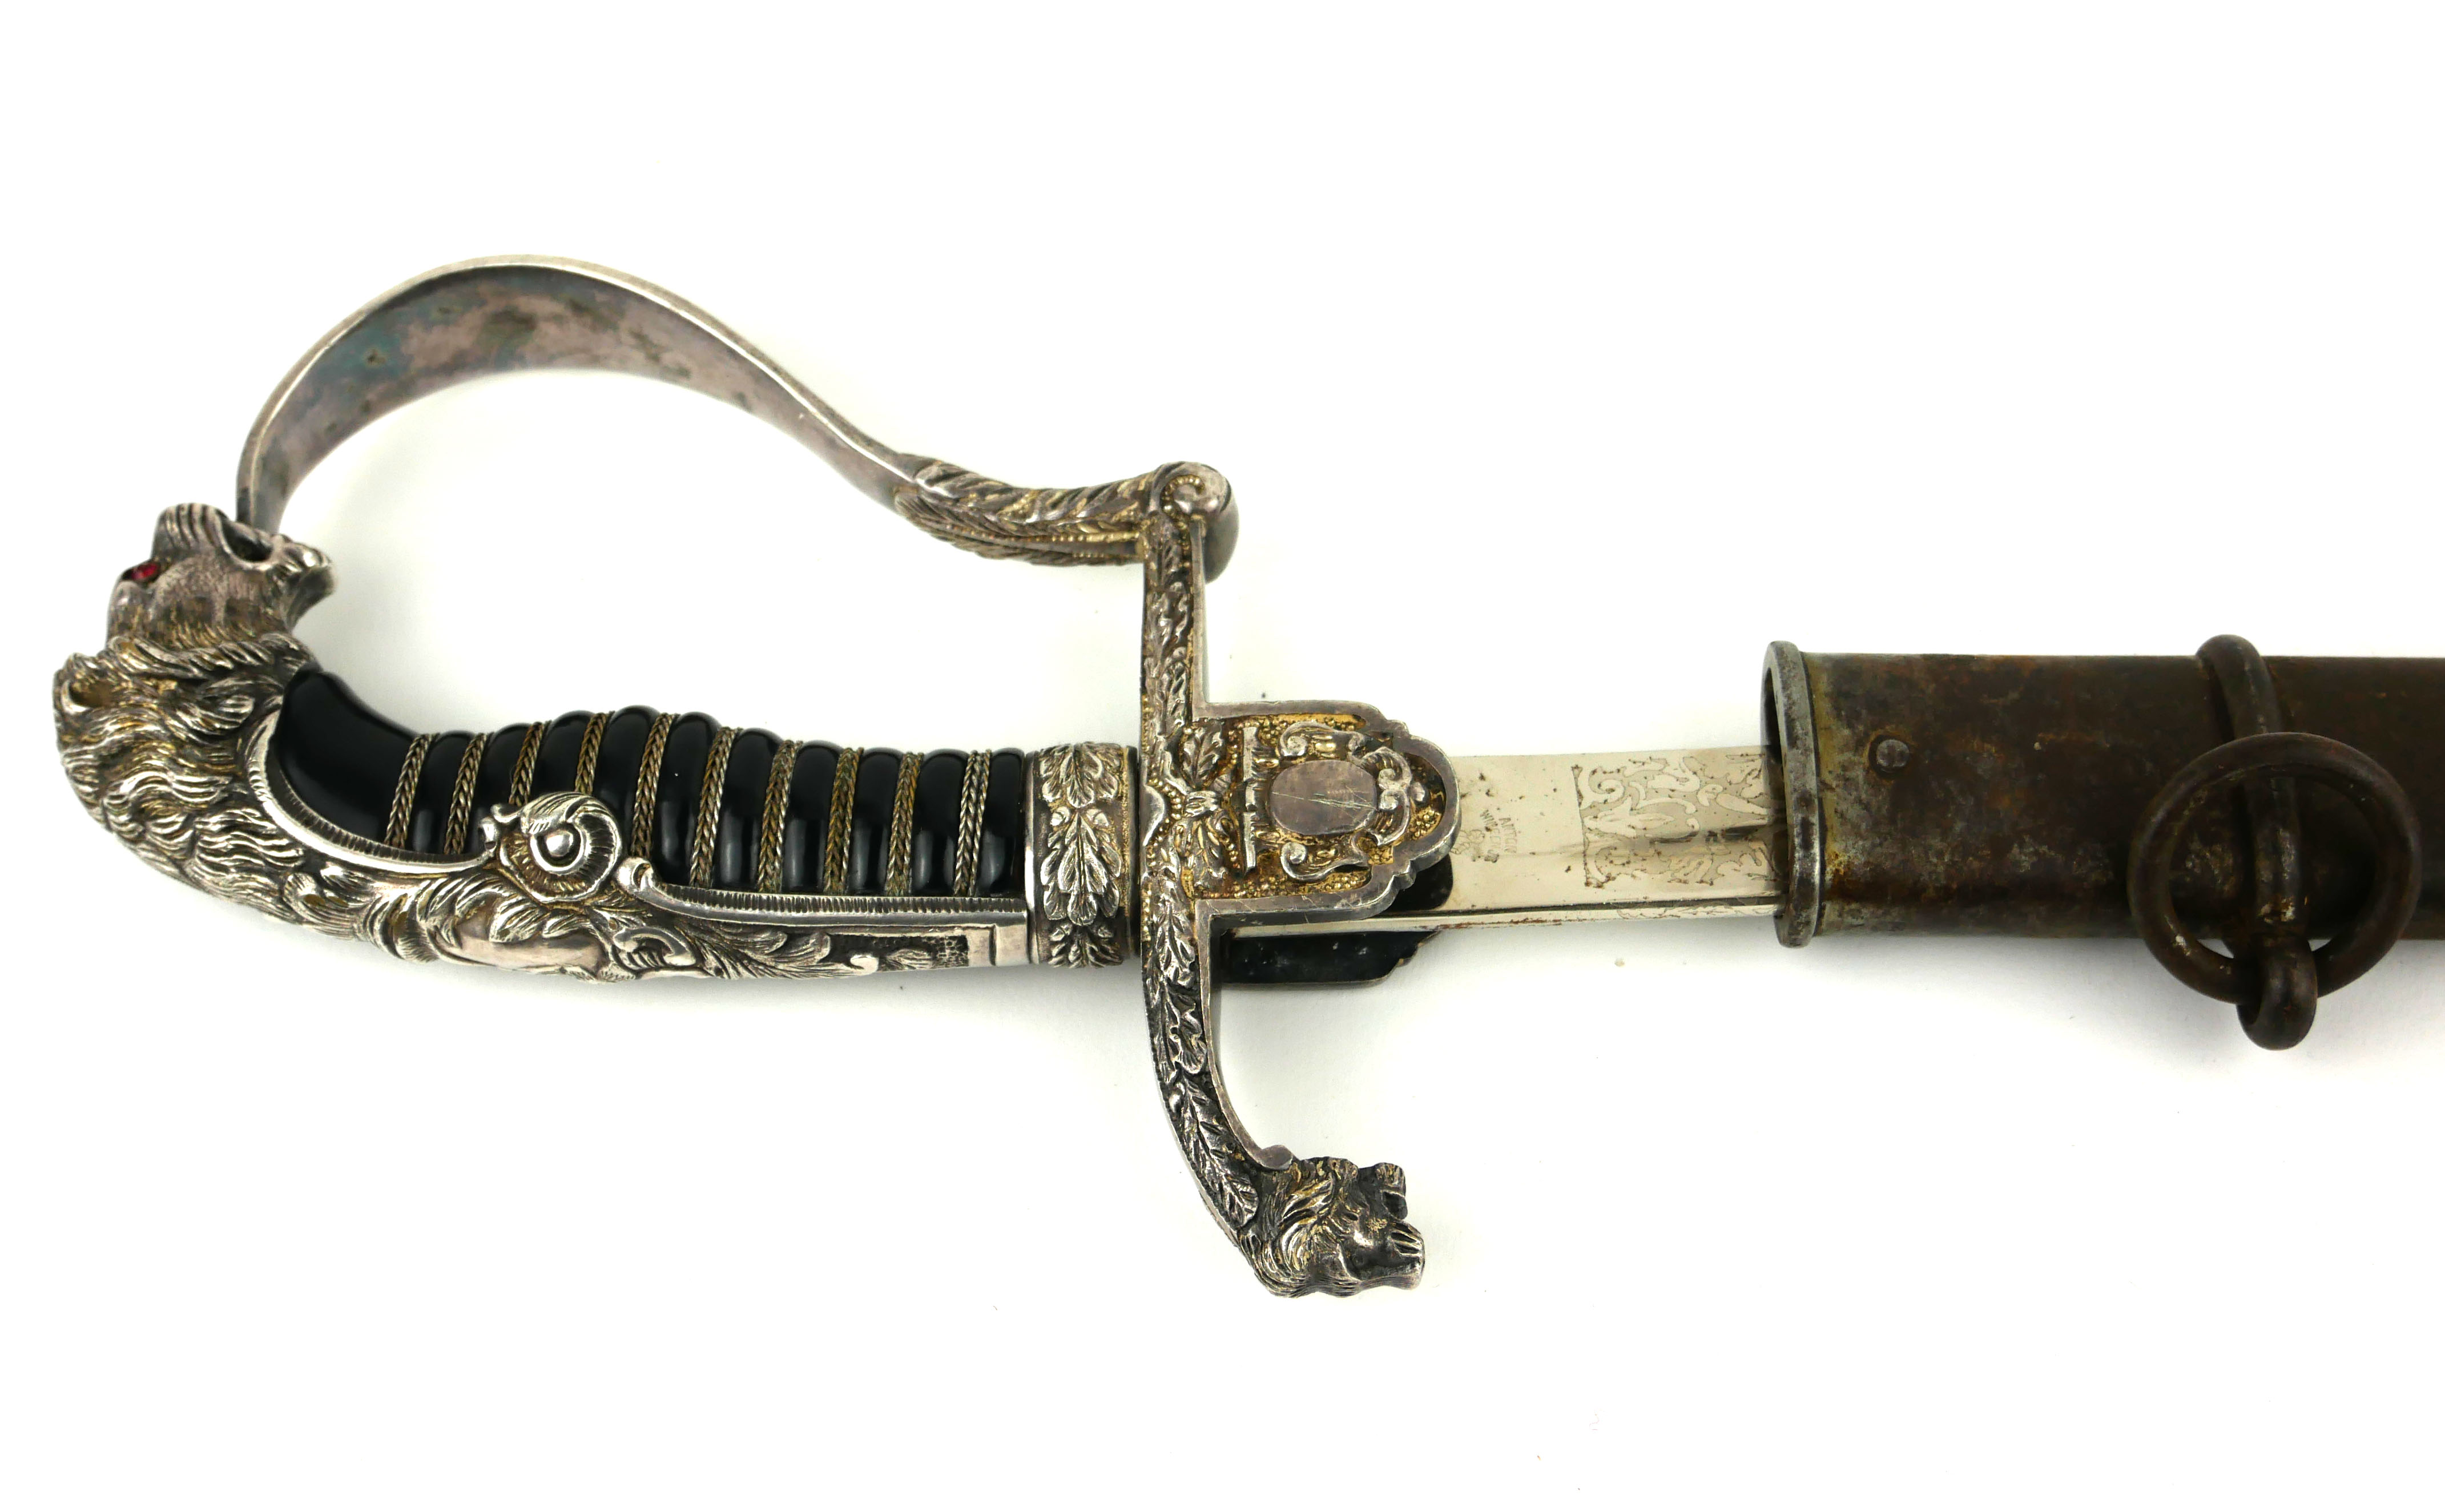 AN EARLY 20TH CENTURY GERMAN ARMY OFFICERS DRESS SWORD Having a lion mask handle and steel blade